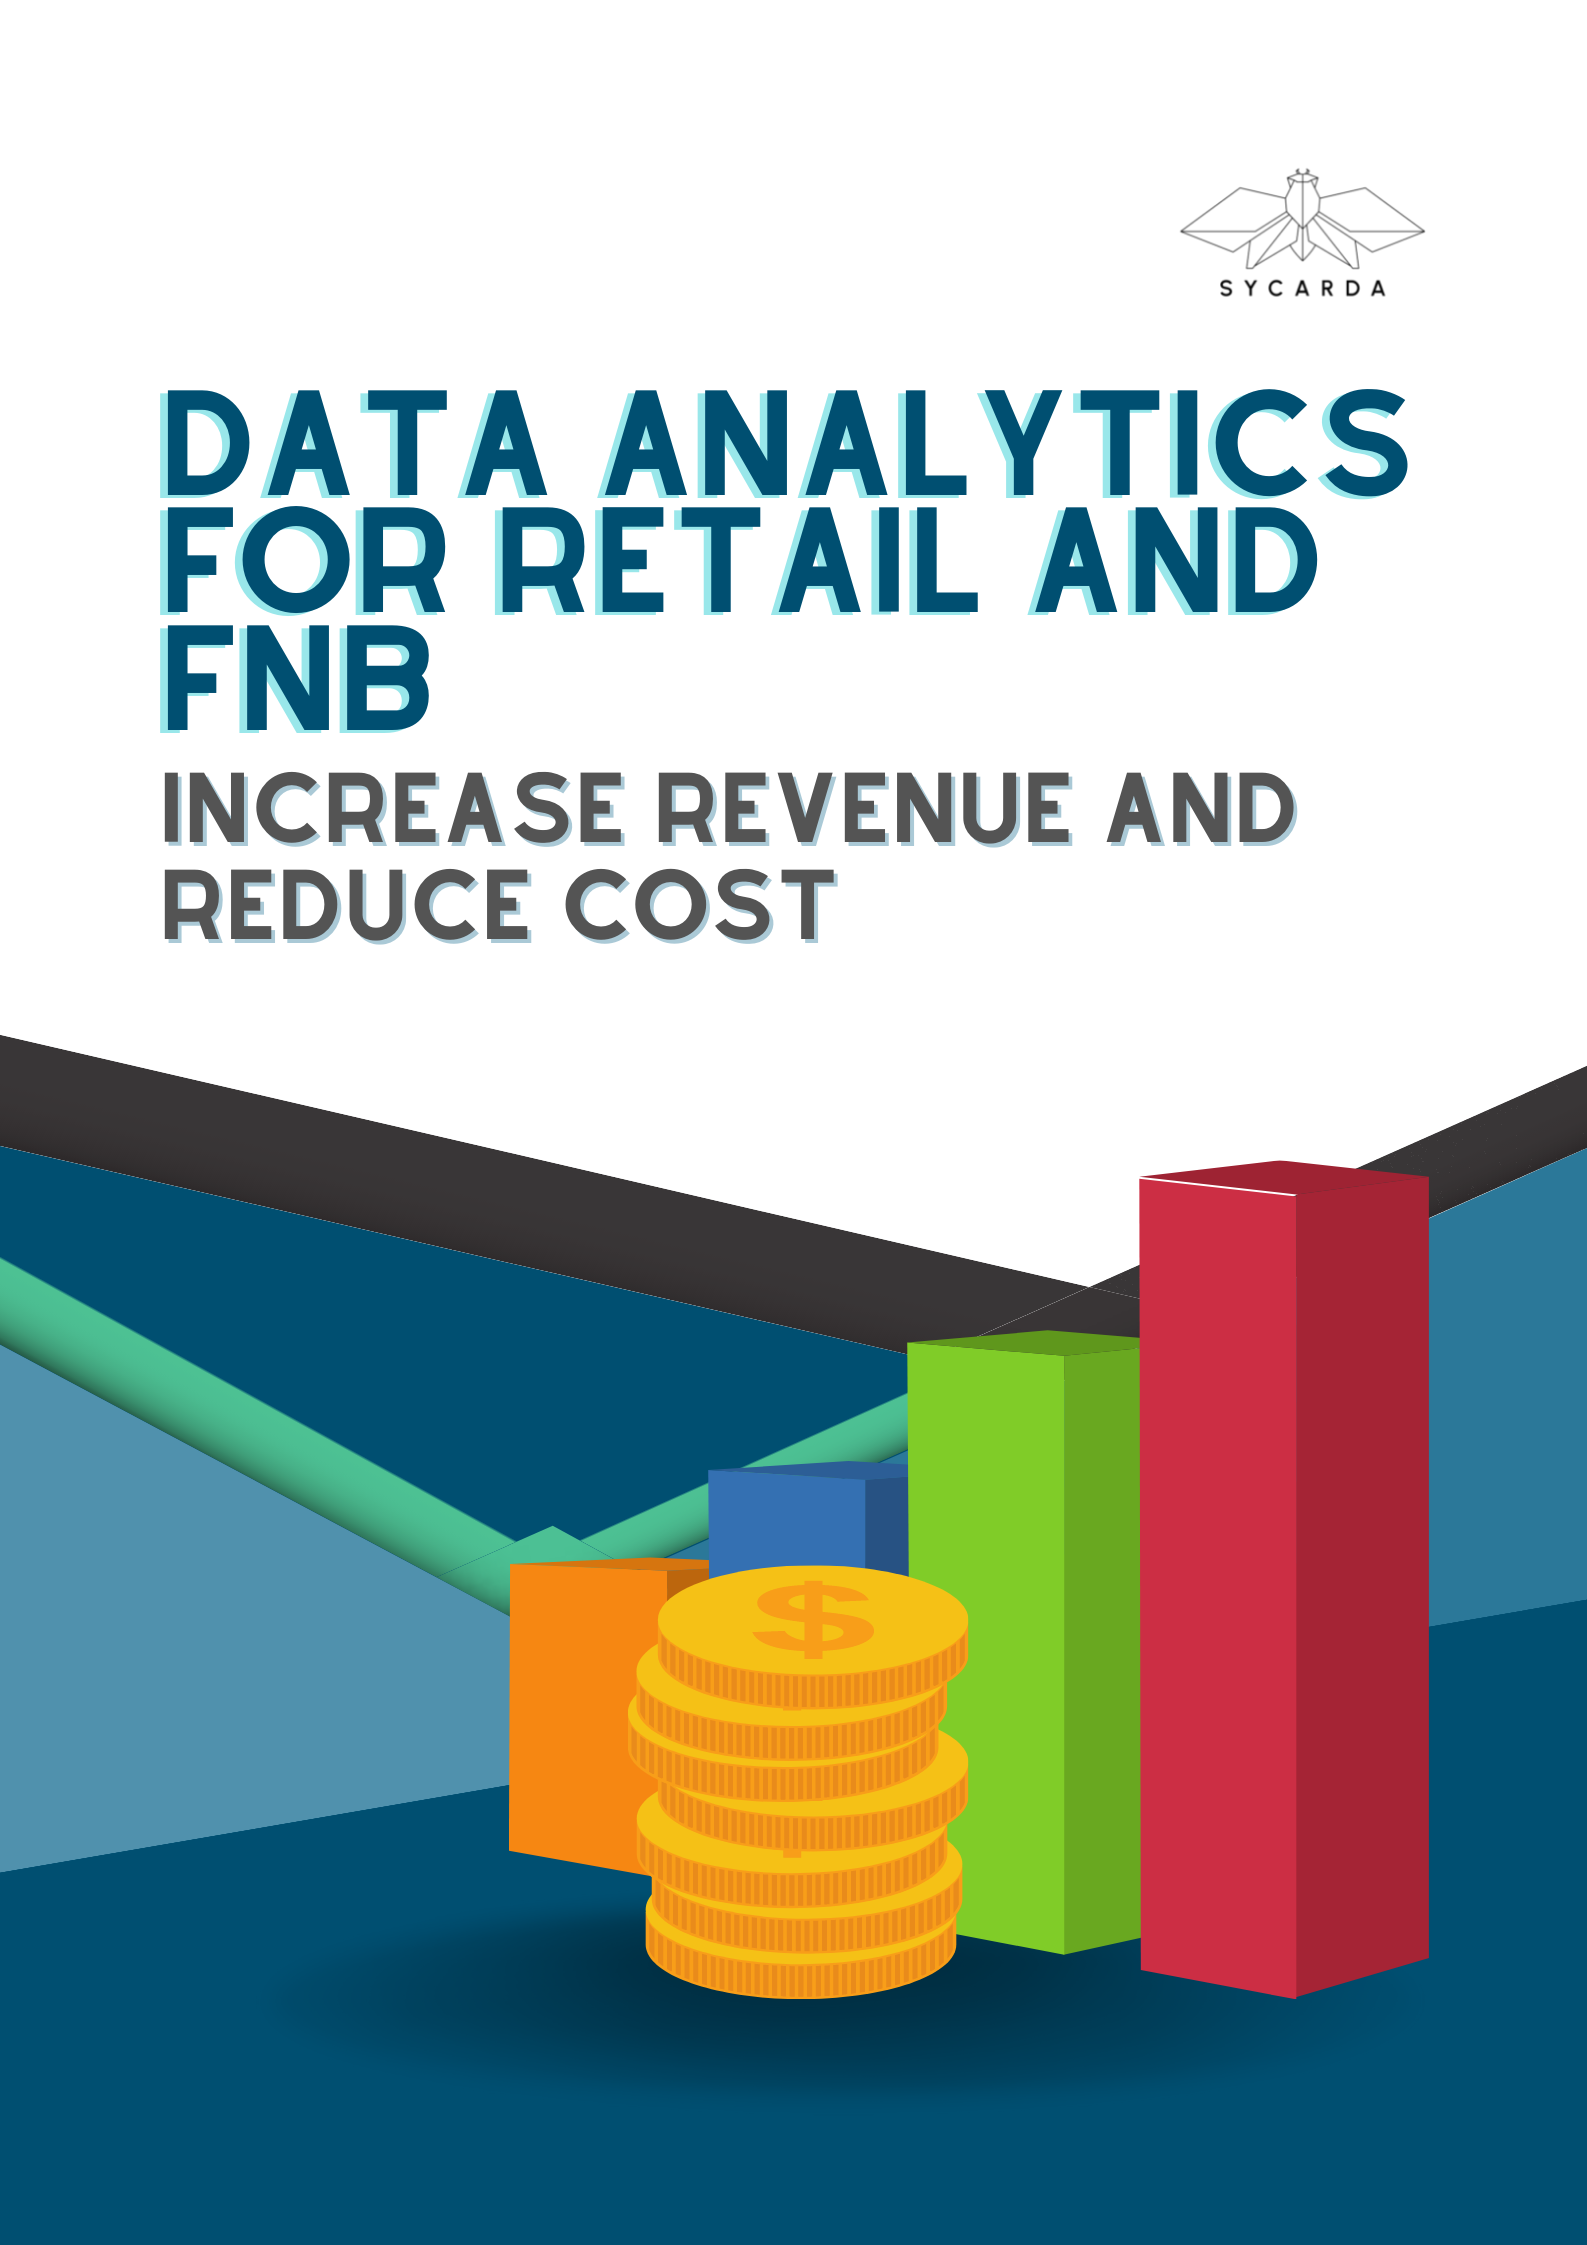 Cover of E-Book from SYCARDA about Data Analytics for Retail and F&B Increase Revenue and Reduce Cost Cover.